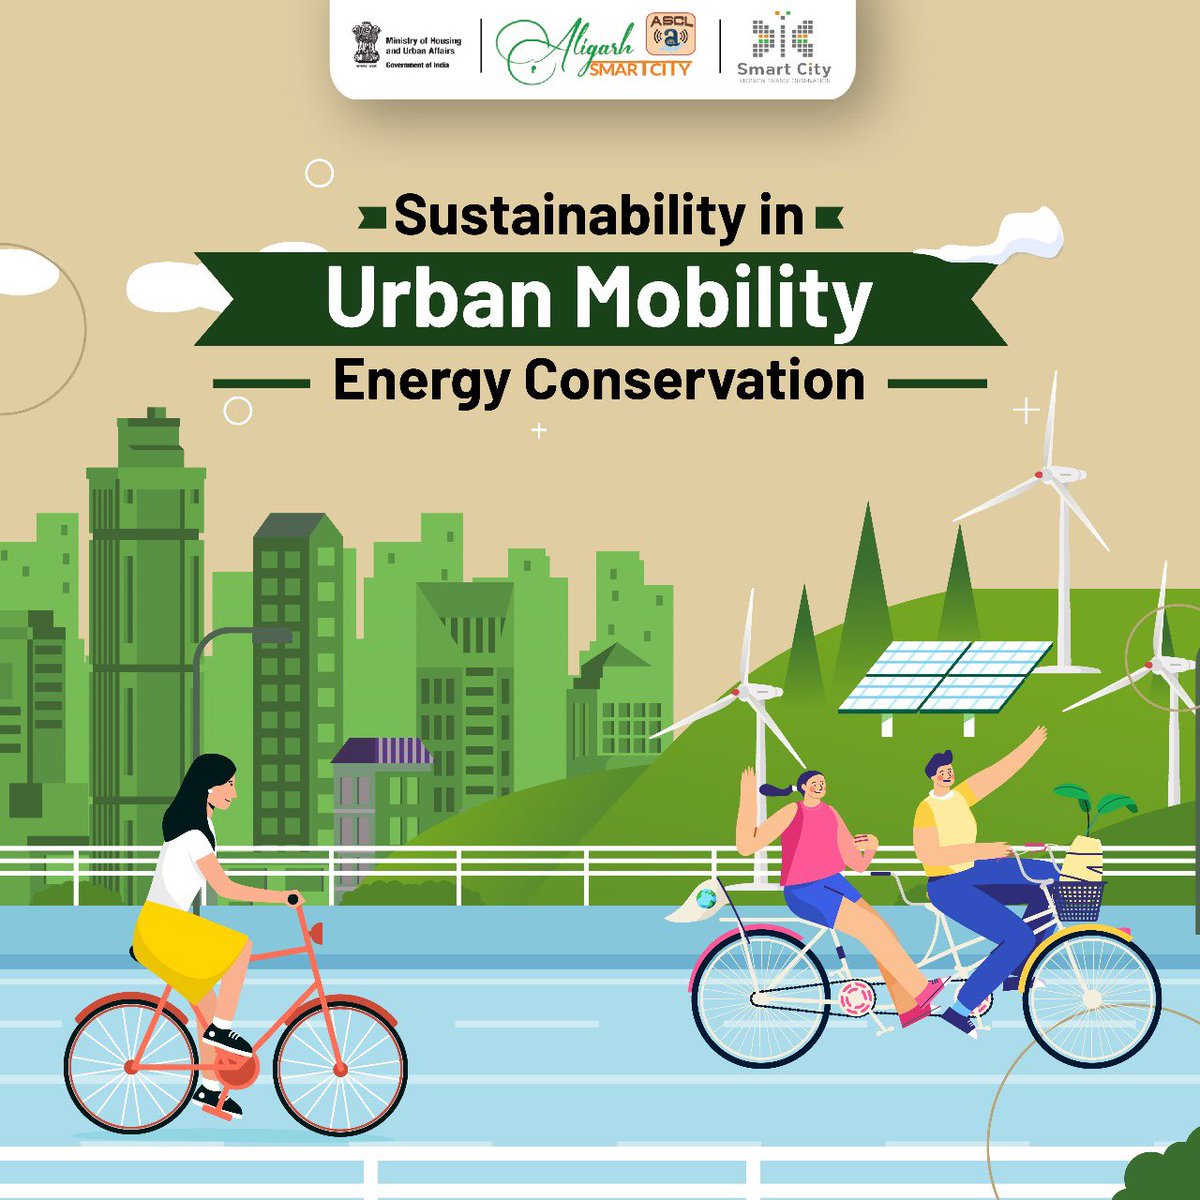 Driving sustainability in Aligarh Smart City: Innovative urban mobility solutions and energy conservation strategies to reduce carbon emissions and enhance public transportation efficiency. #mohua #sustainability #aligarh #aligarhsmartcity #smartcities #smartcitiesmission